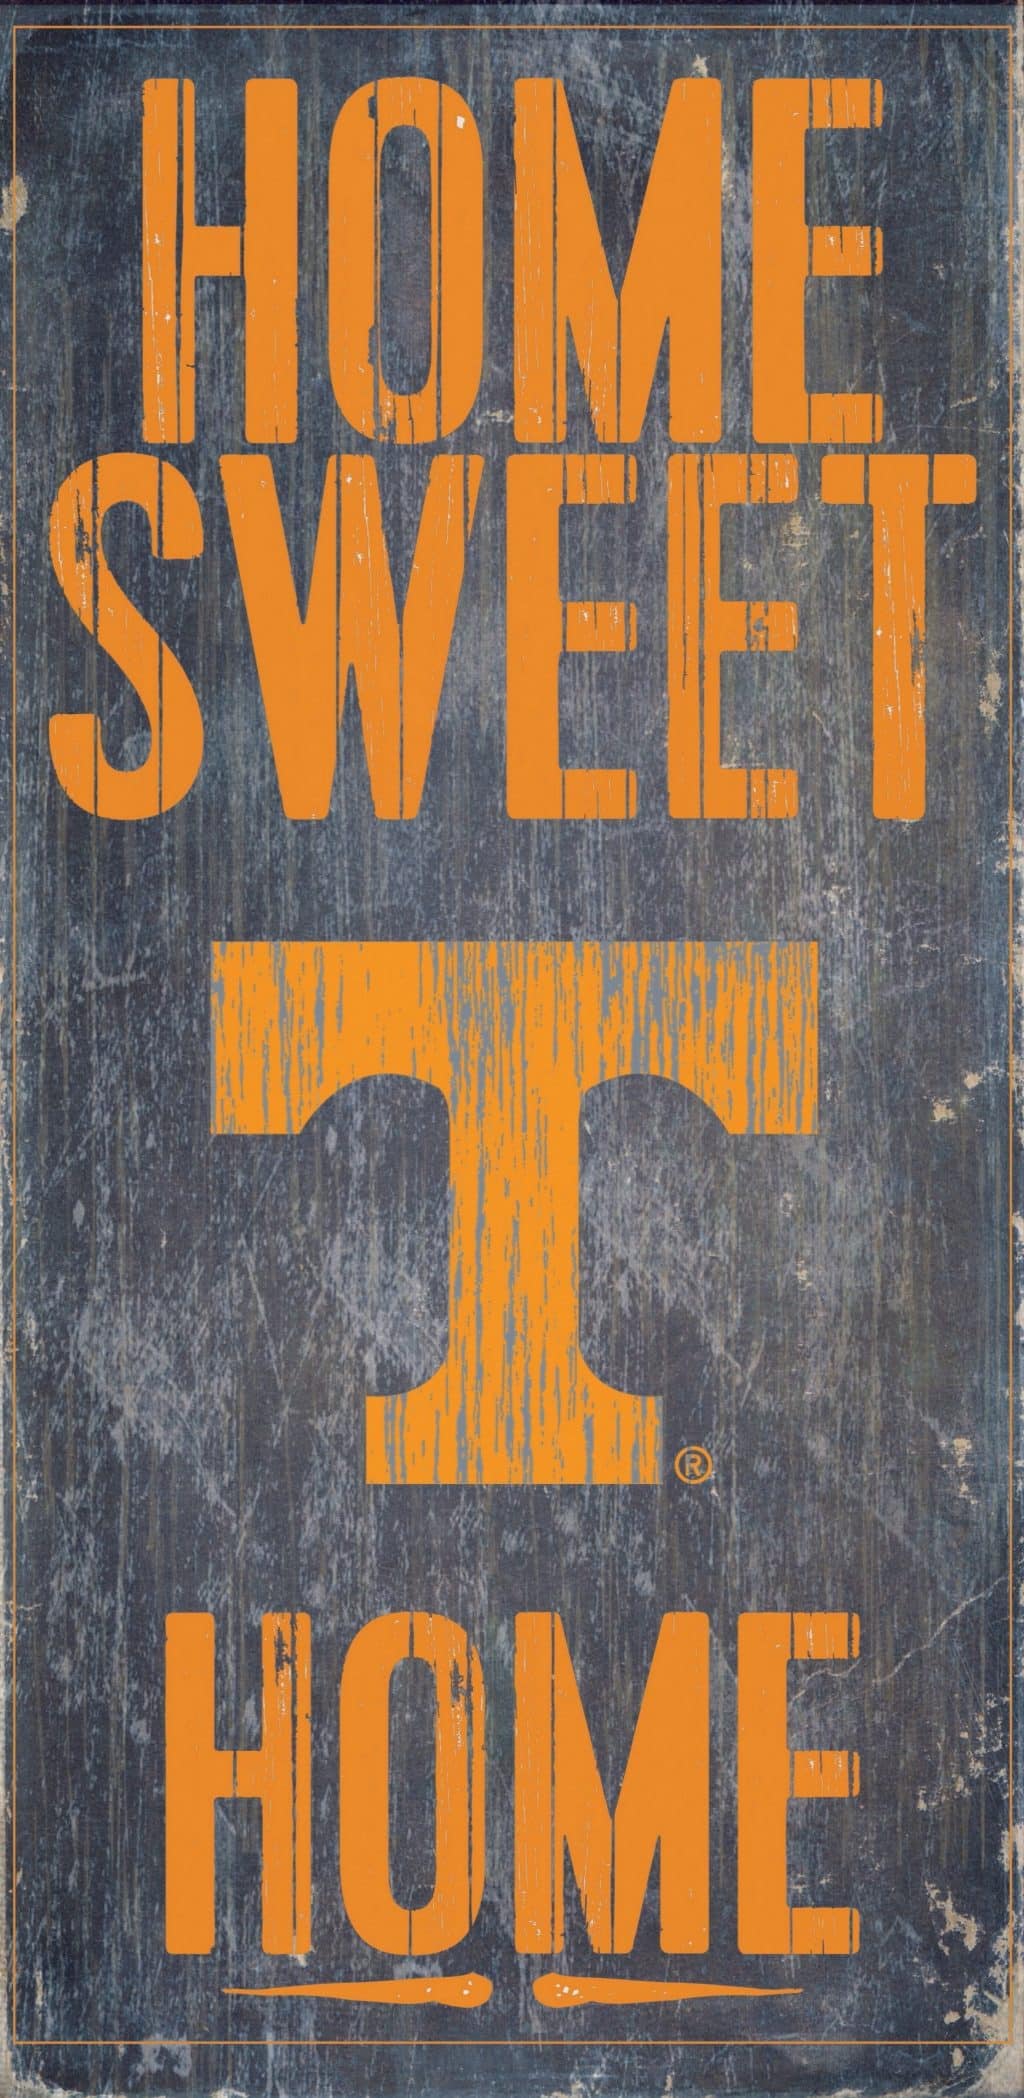 Tennessee Volunteers Wood Sign - Home Sweet Home 61024 x 2098